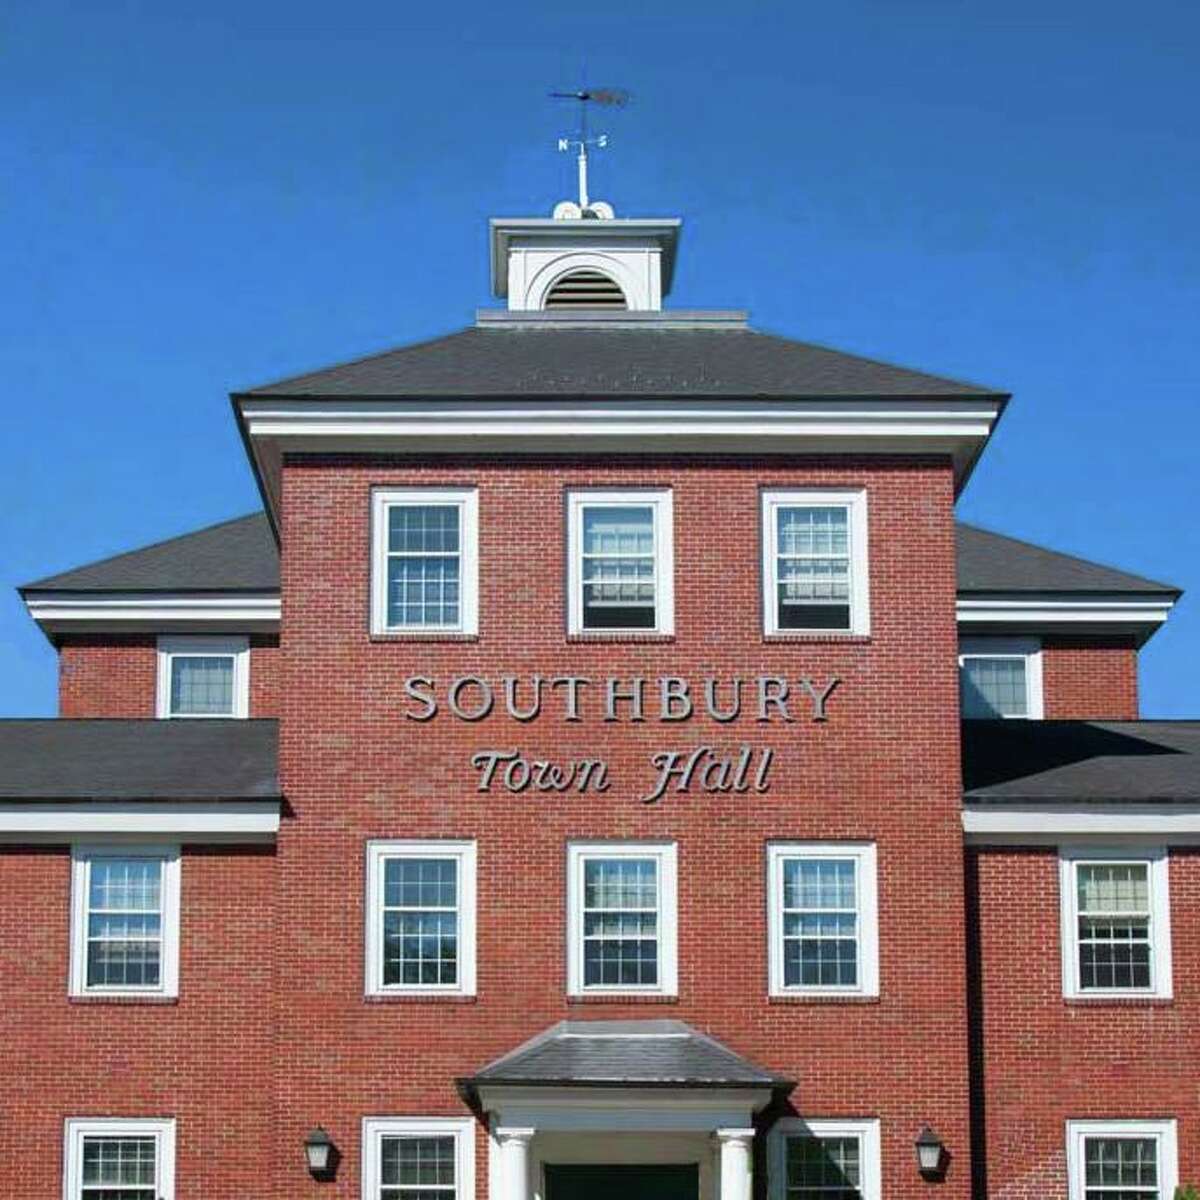 Southbury Town Hall